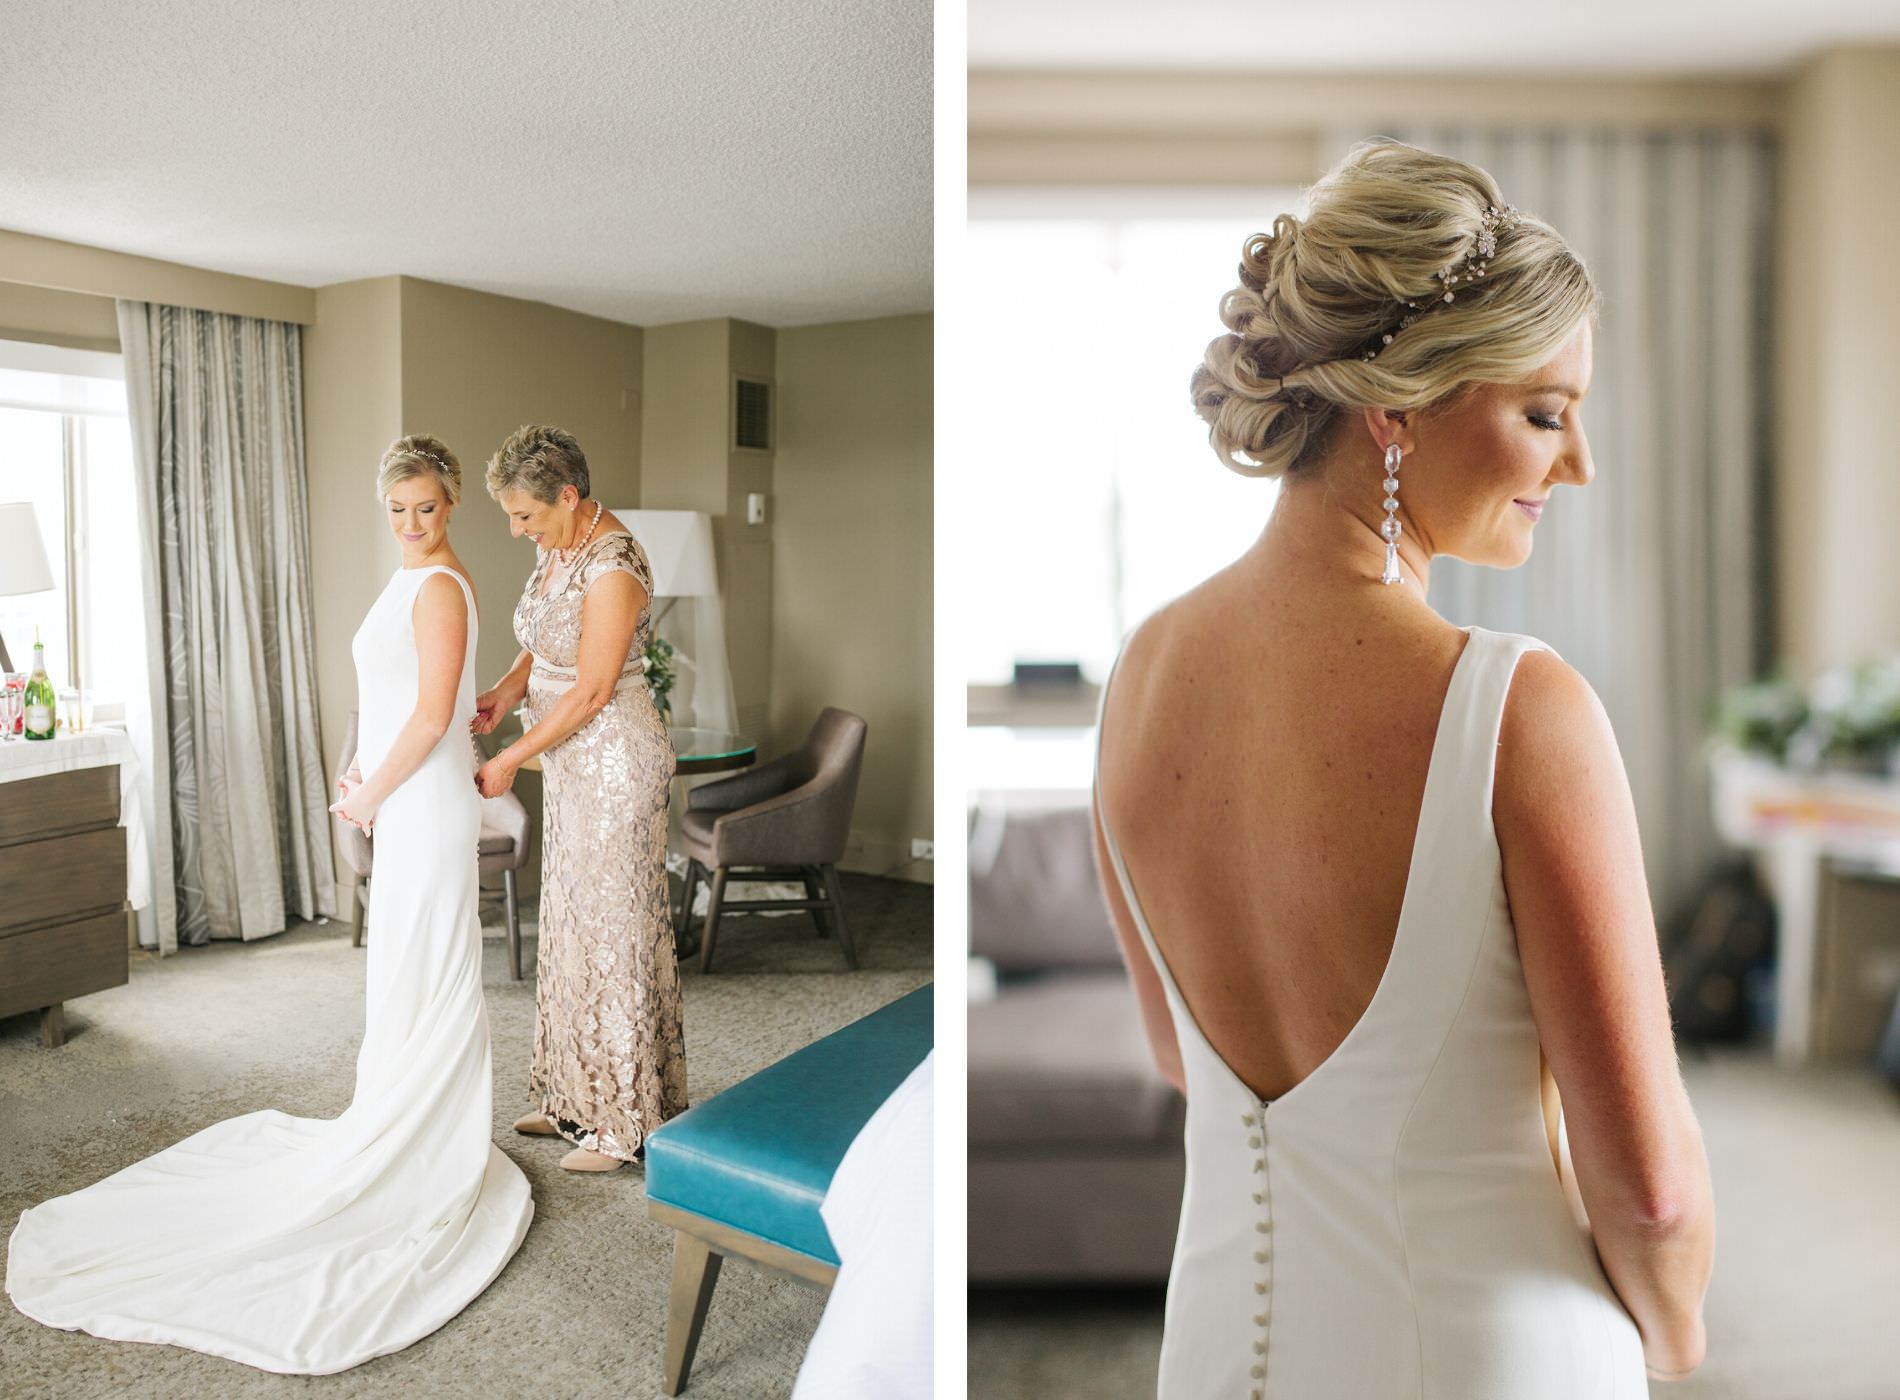 Mom Helping Bride Get Dressed and Ready | Simple Sheath Ivory Crepe Bateau Neck Low Back Bridal Gown by Theia | Michele Renee the Studio